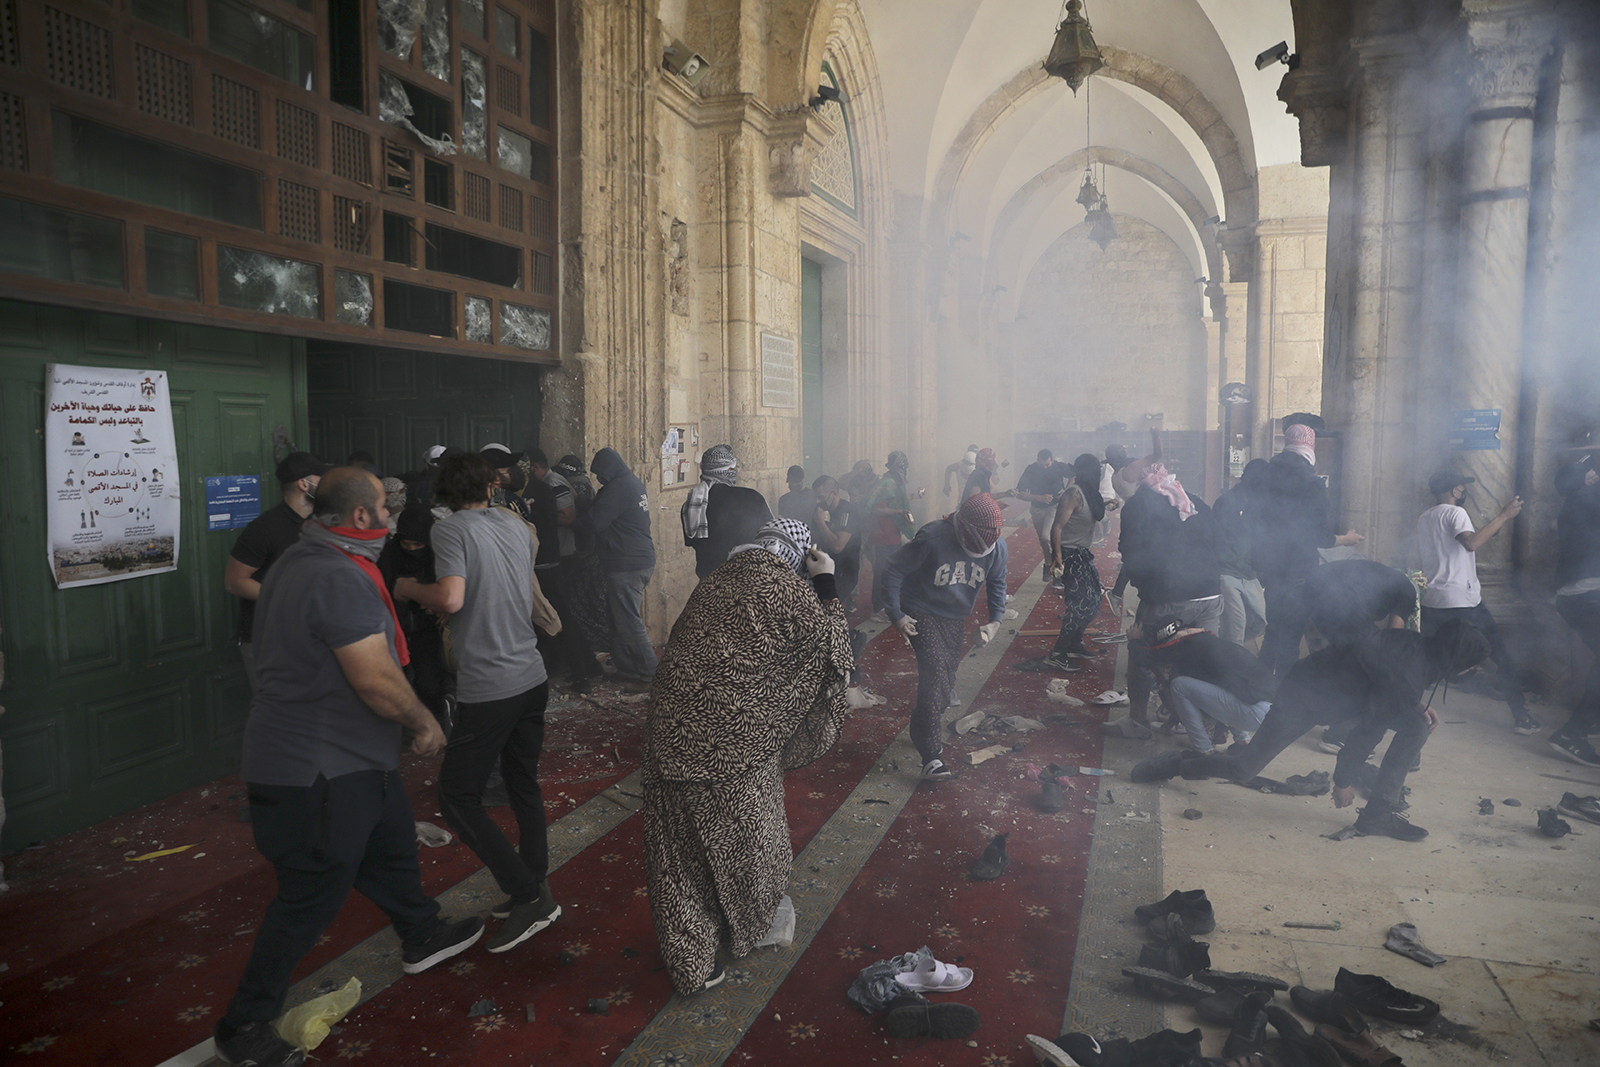 Palestinians clash with Israeli security forces on May 10, 2021, at the Al-Aqsa Mosque compound in Jerusalem's Old City. (AP Photo/Mahmoud Illean)